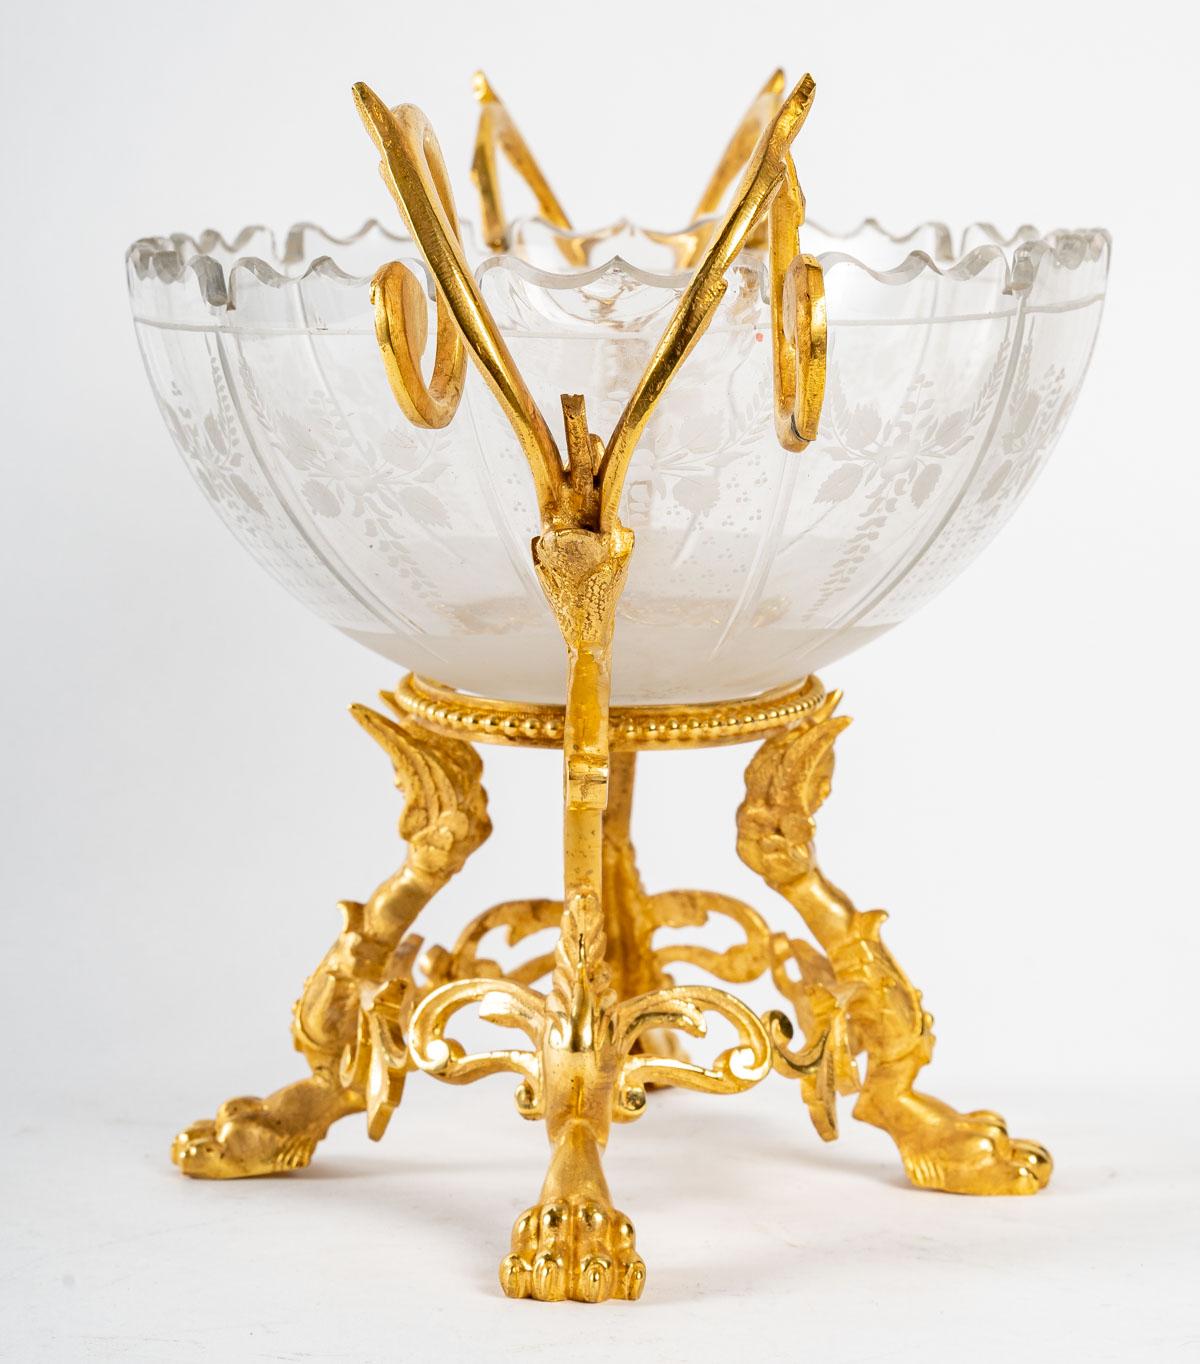 Napoleon III Cup and a Pair of Cornet, 19th Century